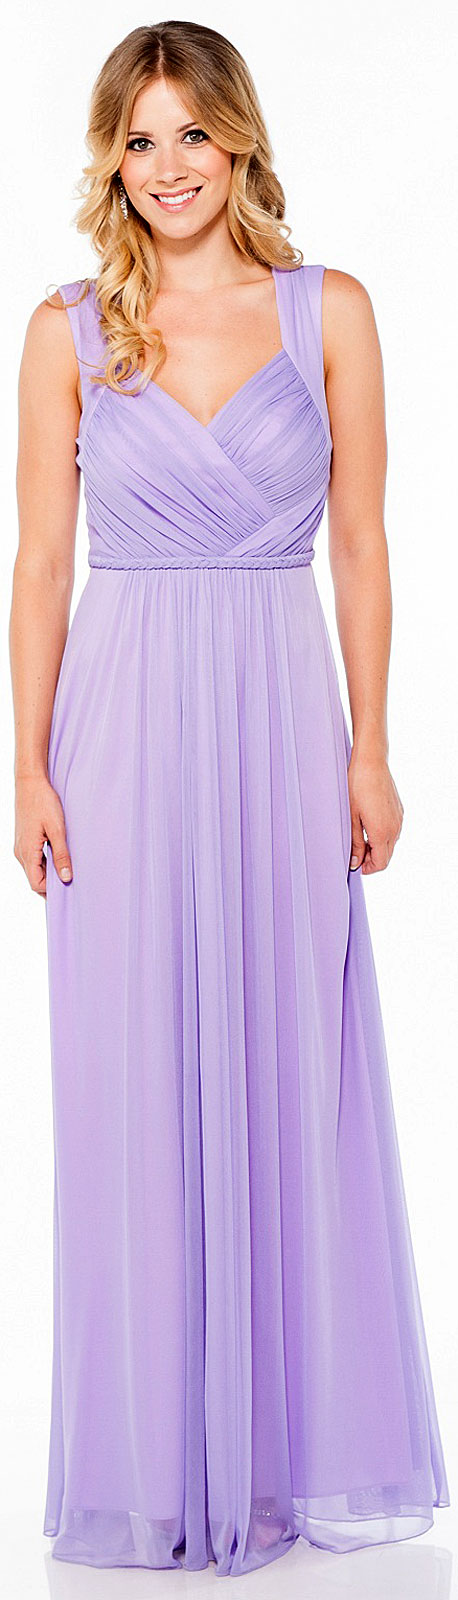 Image of Braid Accent Ruched Long Formal Bridesmaid Dress  in Lilac